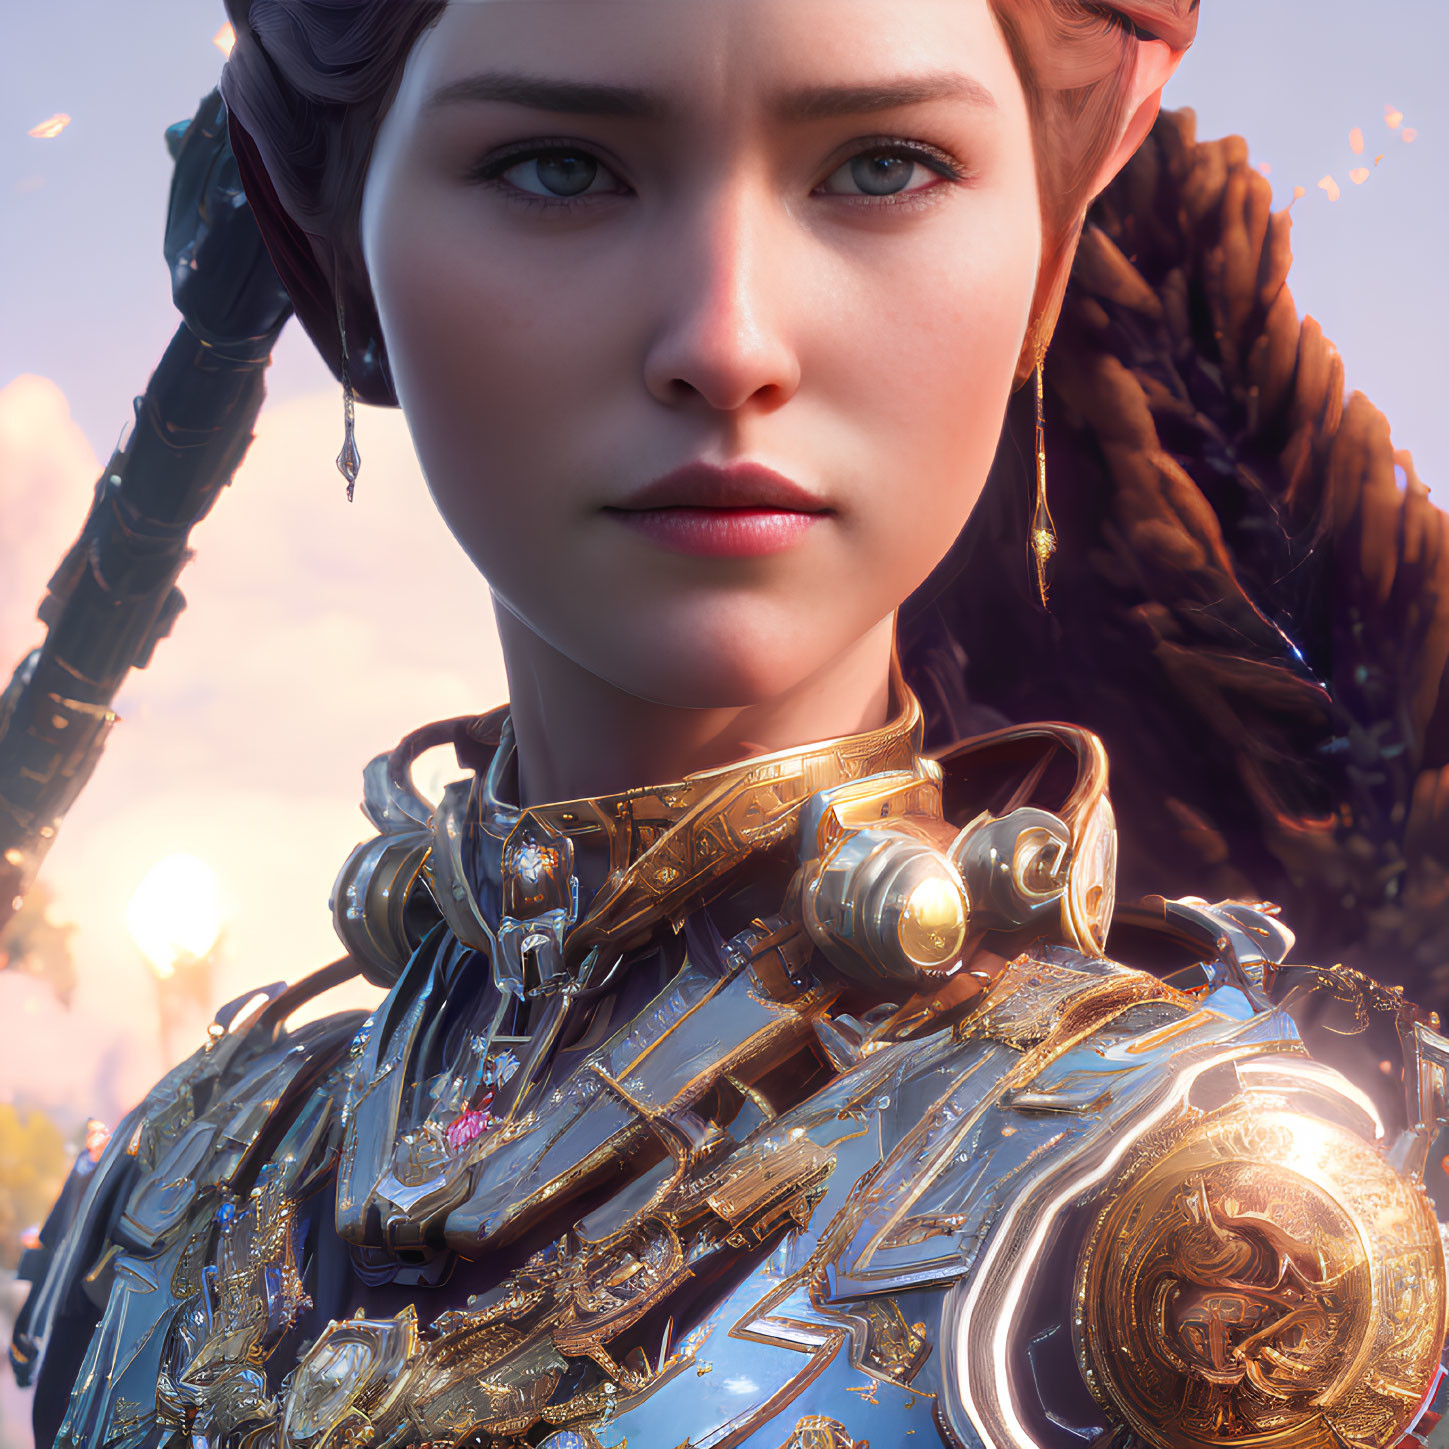 Female character in blue and gold armor with braided hair and focused expression on soft-lit background.